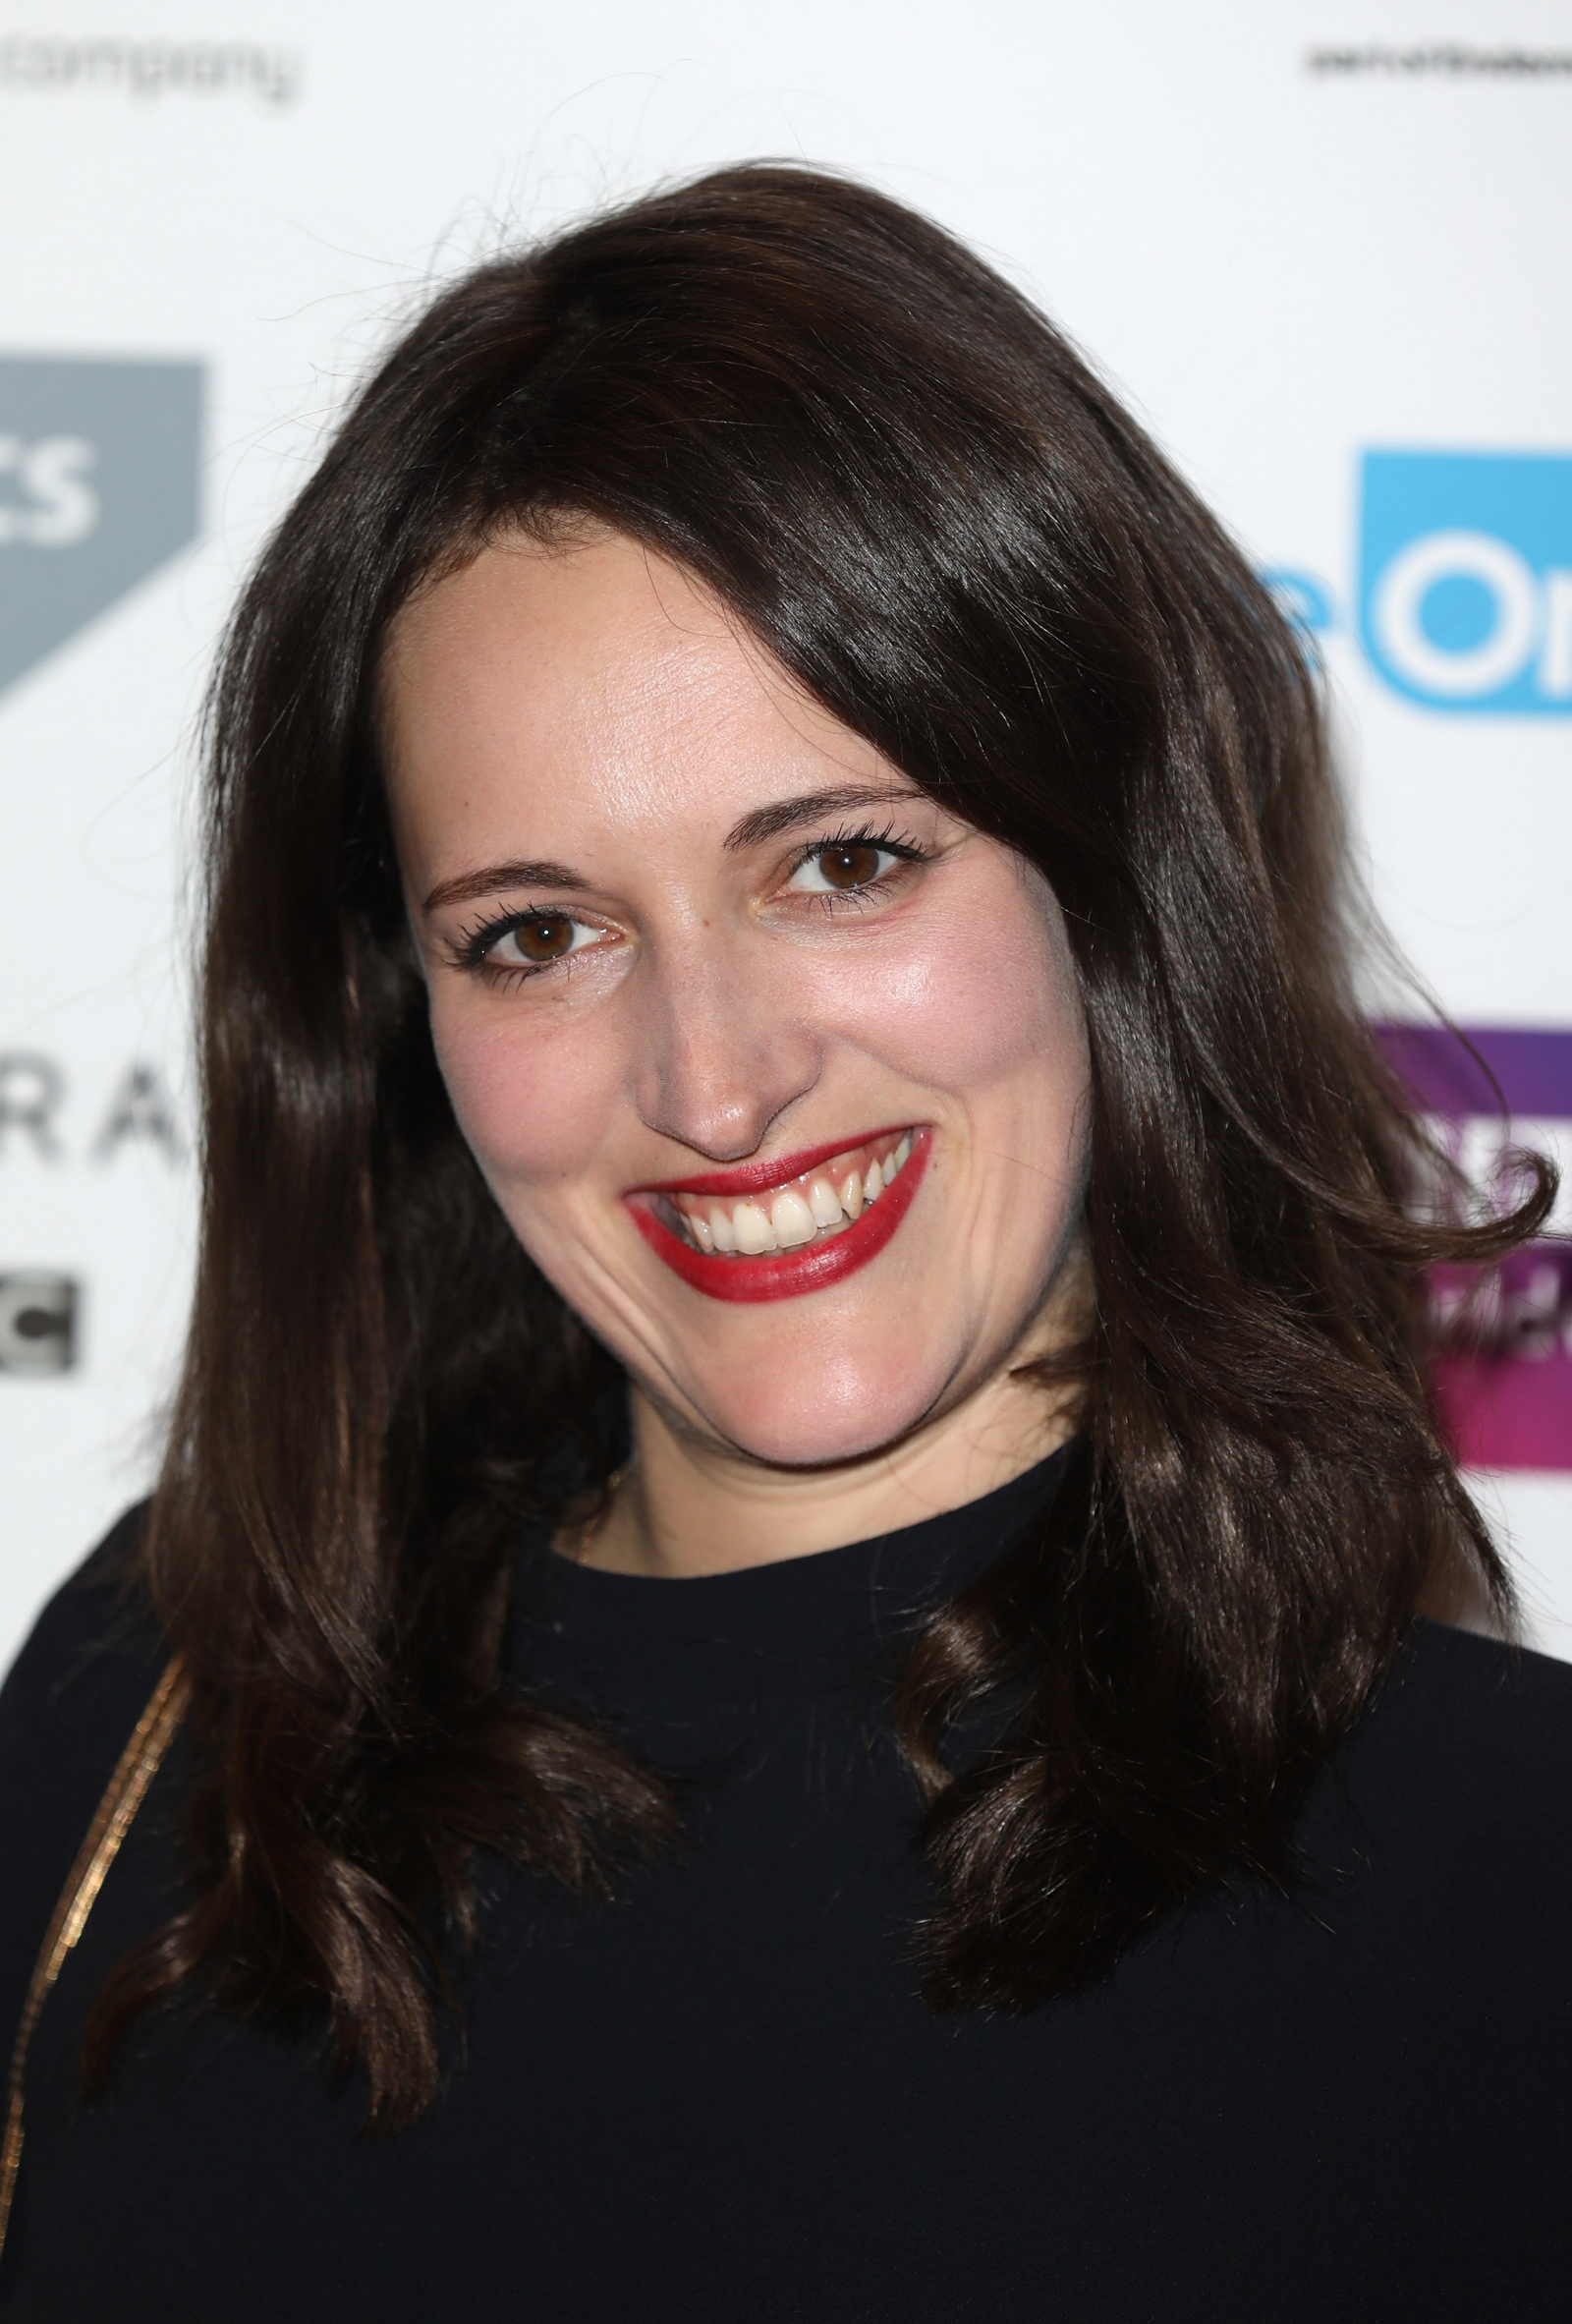 Who's that girl: Meet Phoebe Waller-Bridge, Fleabag star tipped to be next Doctor Who